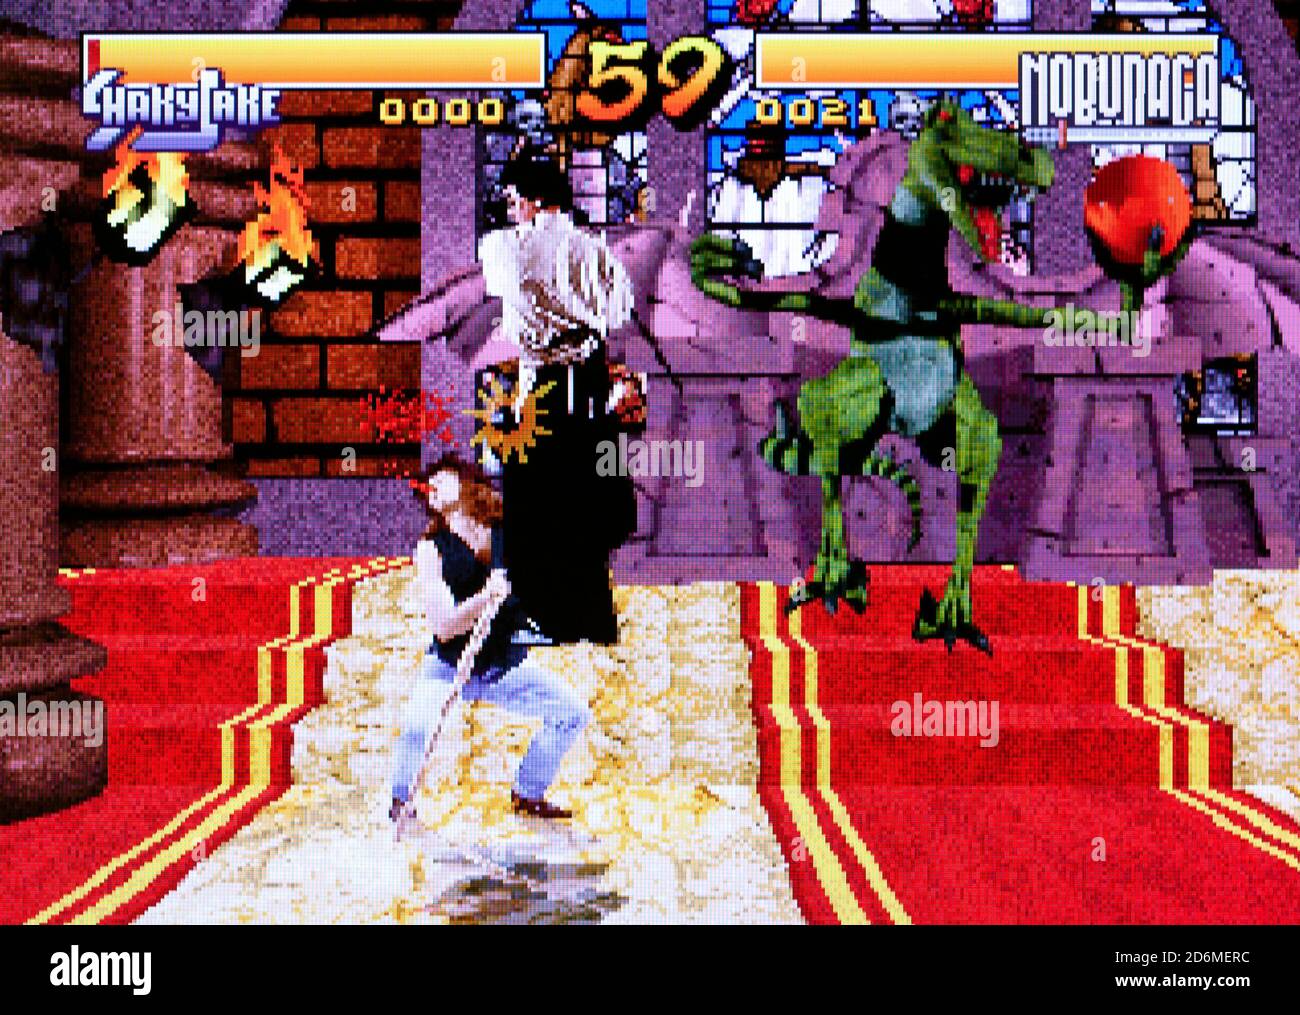 Way of the Warrior - 3DO Interactive Multiplayer Videogame - Editorial Use Only Stock Photo